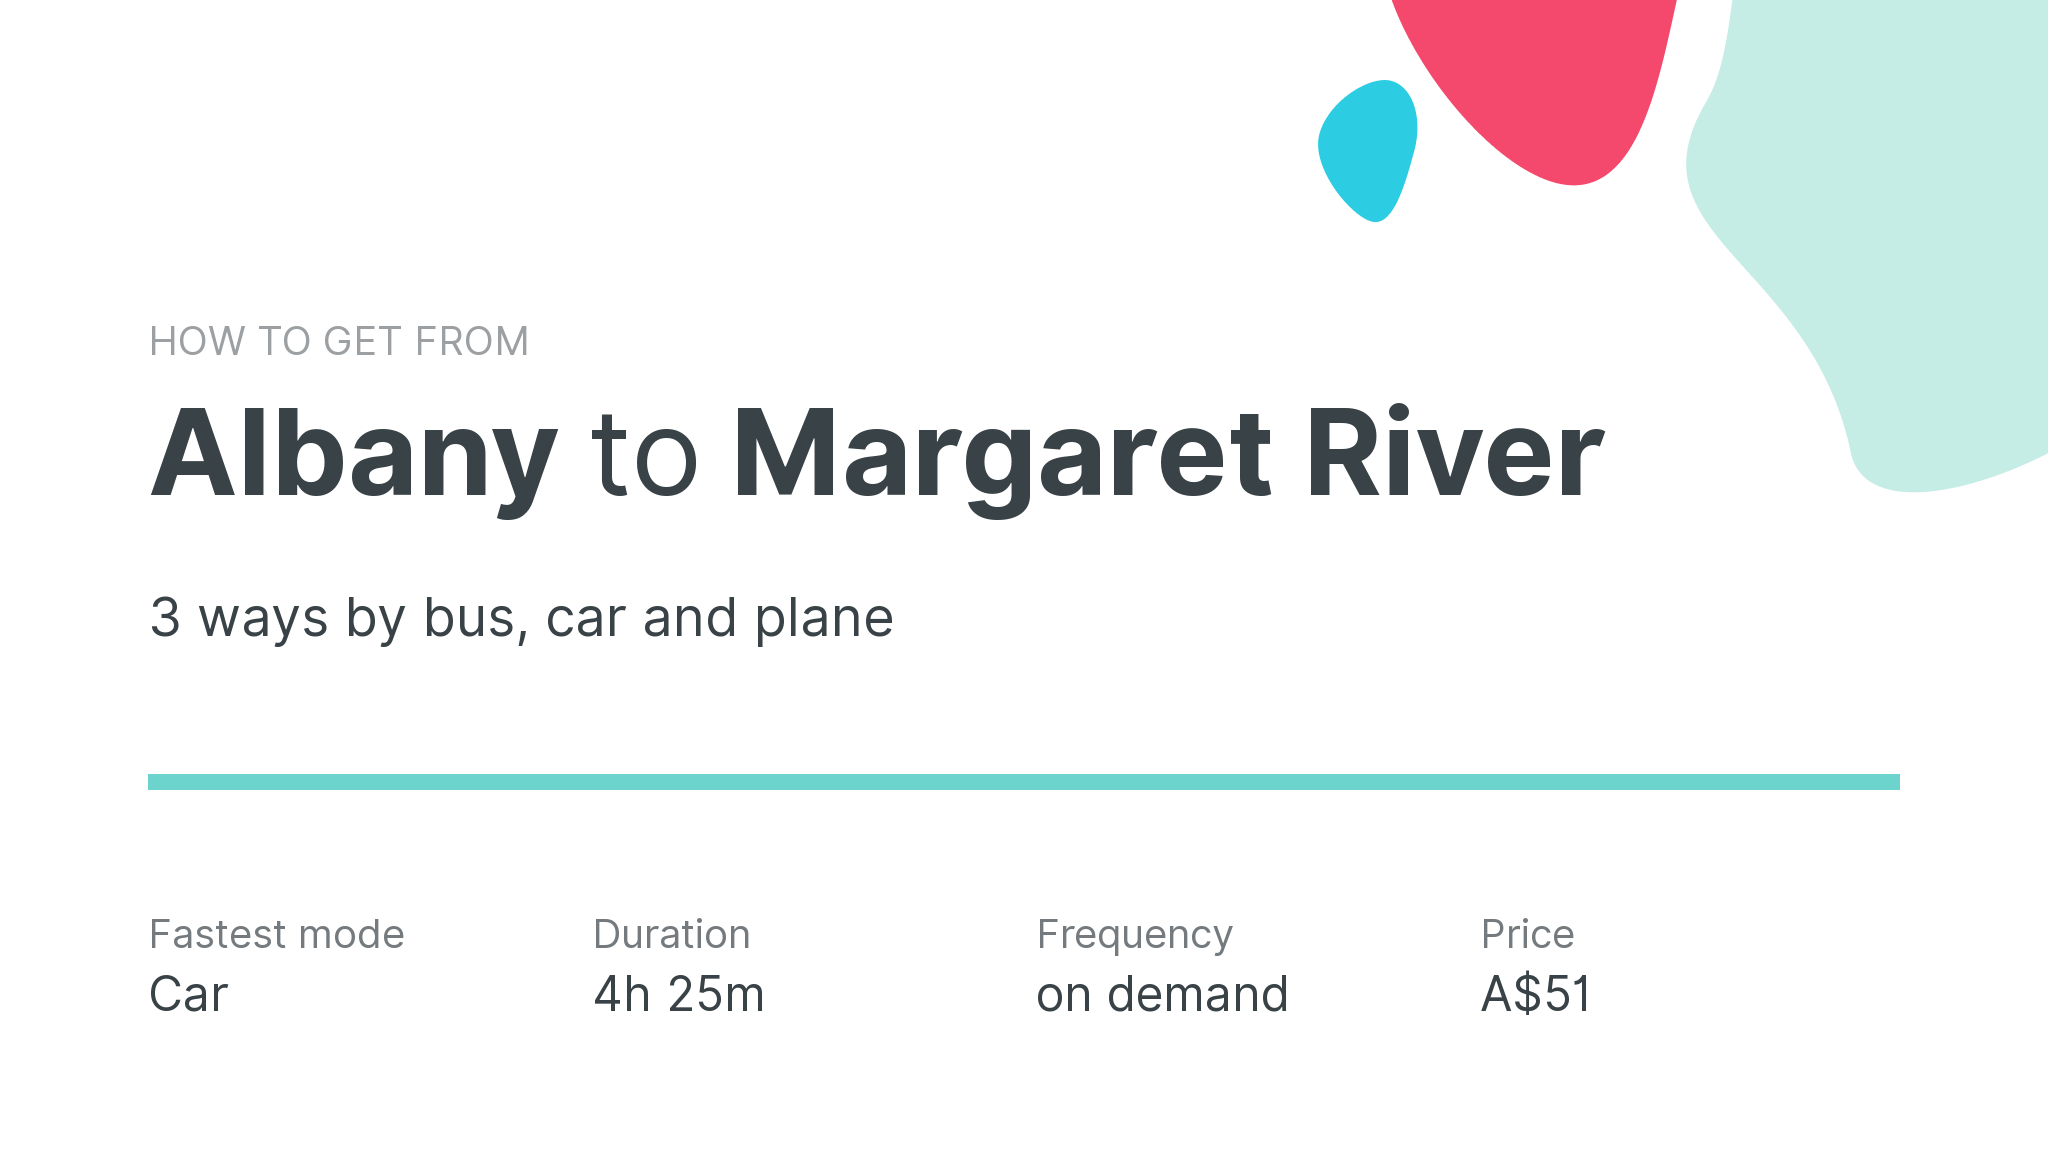 How do I get from Albany to Margaret River